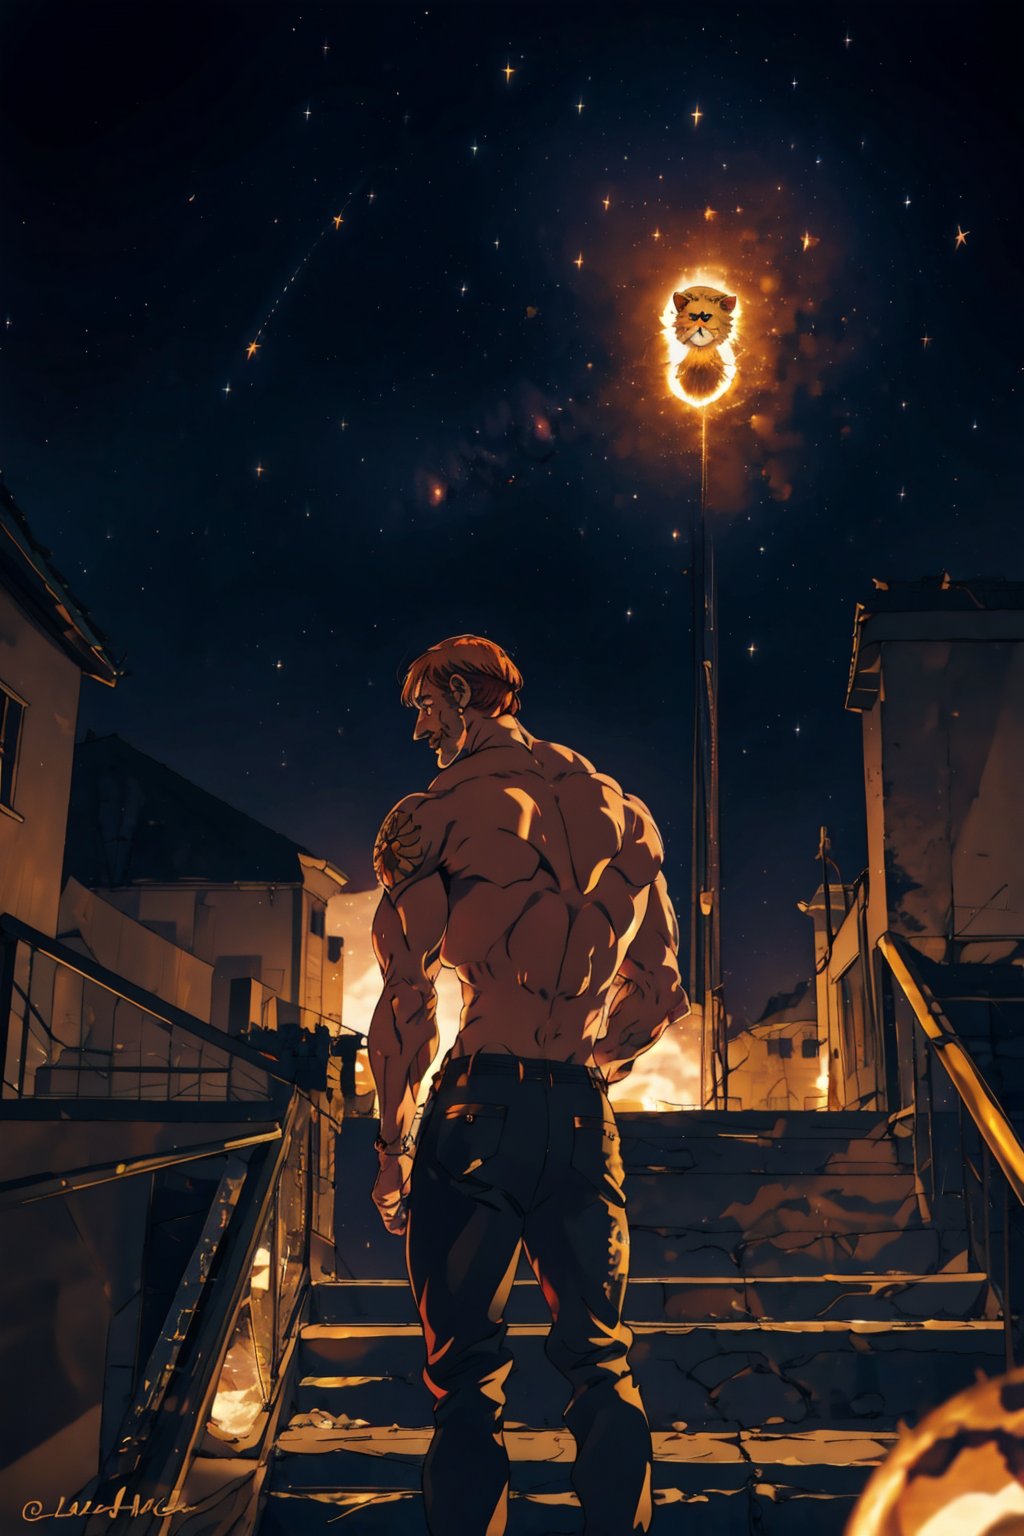 escanor-10:0.95, escanor, 1boy, topless, tattoo, lion head on back, ghostdom_20230621222536-000016:0.7 ,ghostdom, night, backlight, flowers:0.5, stairs, from behind, look at viewer, stary night,  stary night, (stars), (milky way), (dark environment:-0.6), (leo zodiac sign)
,1 girl